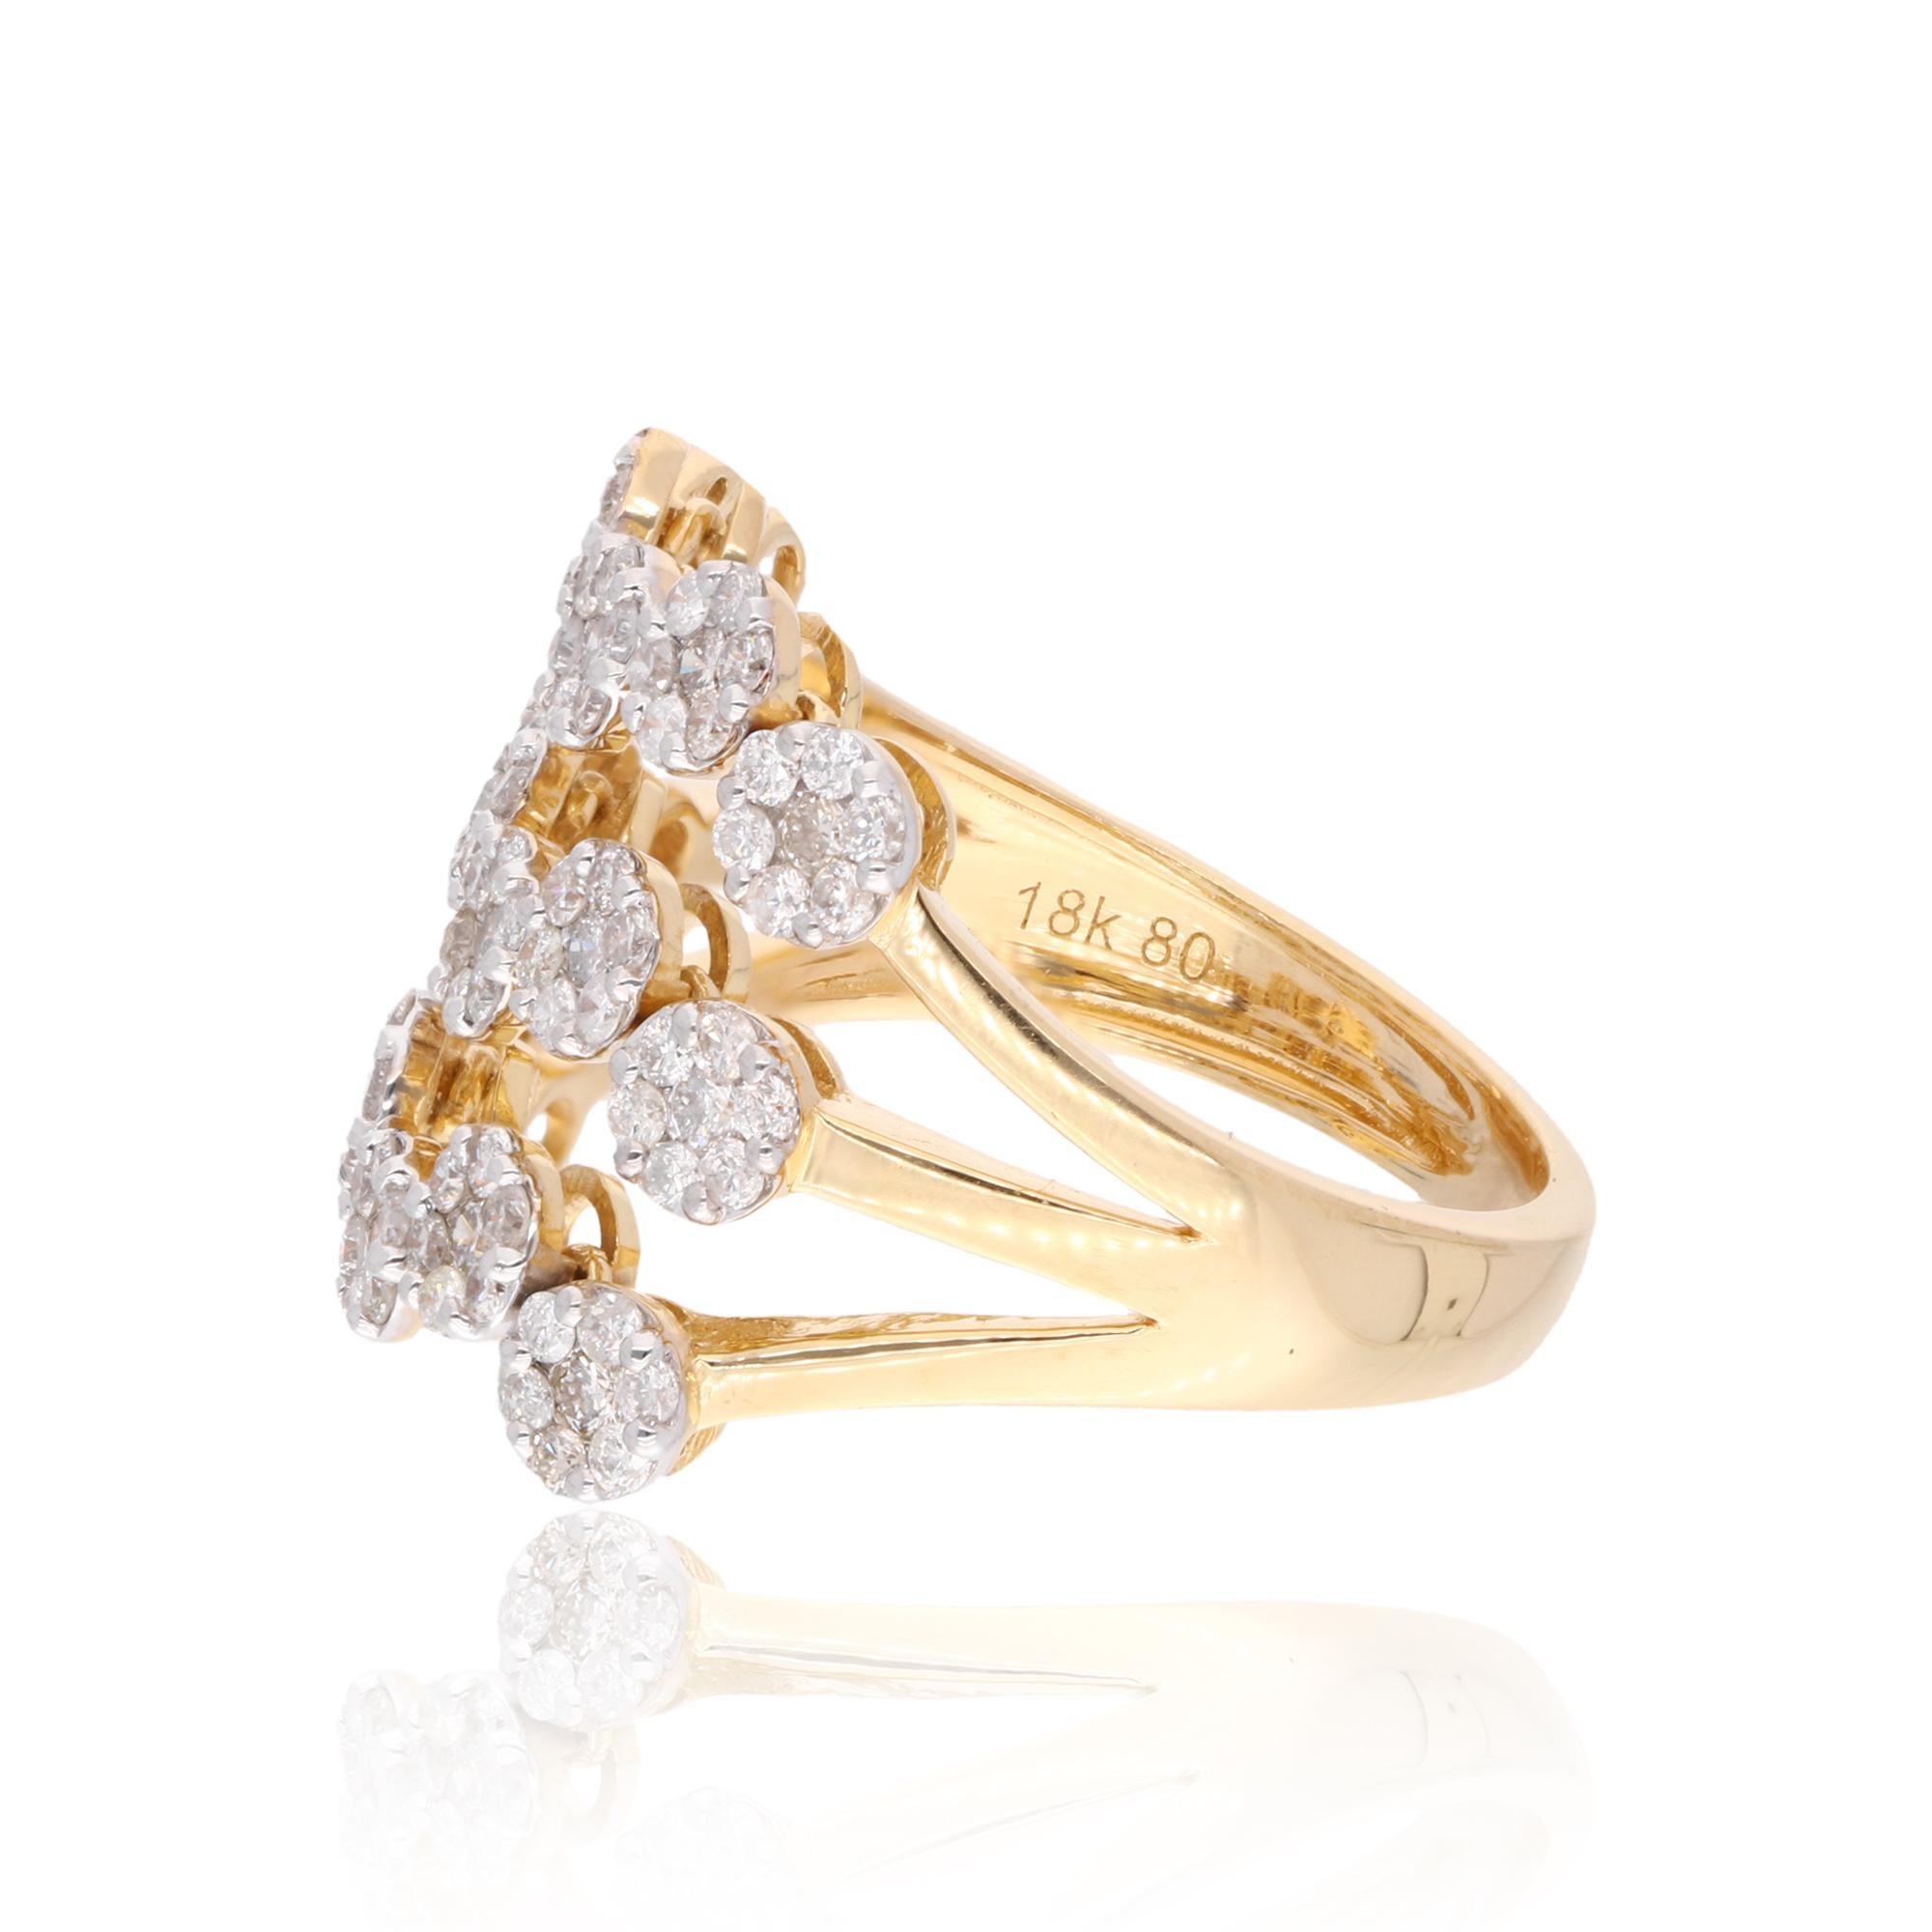 For Sale:  1.05 Carat SI Clarity HI Color Round Diamond Ring 18 Karat Yellow Gold Jewelry 2